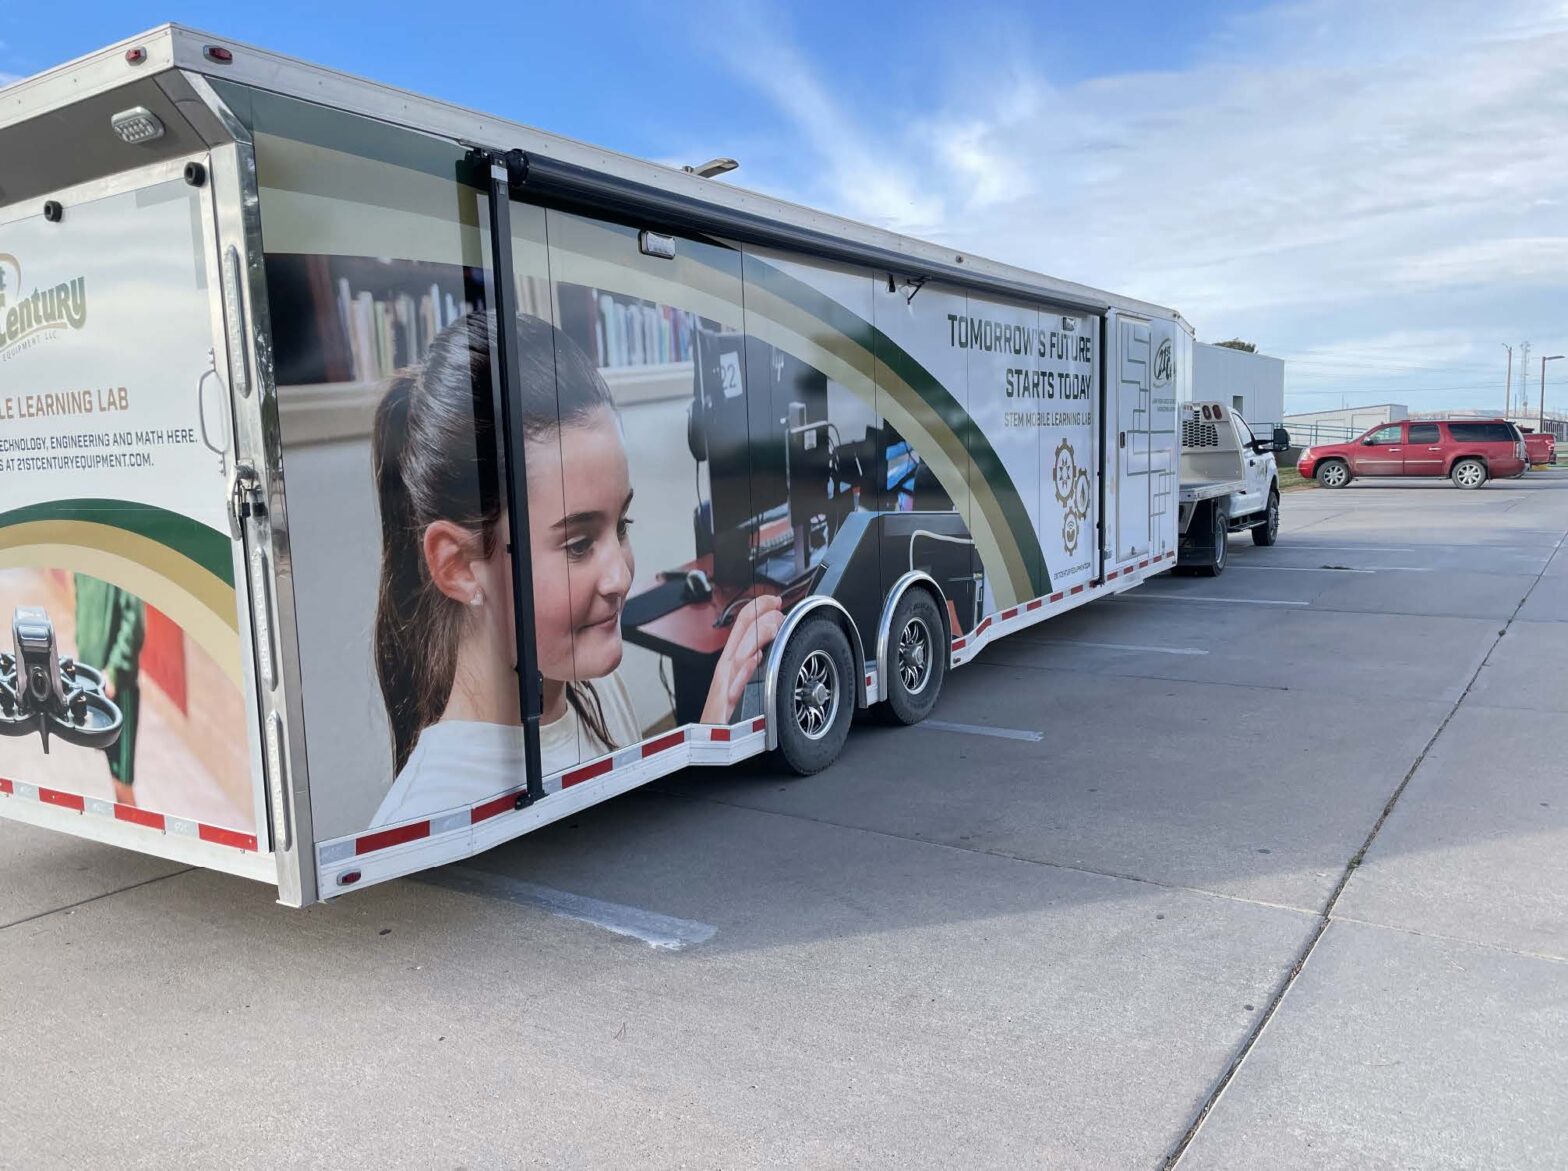 Mobile Learning Lab trailer